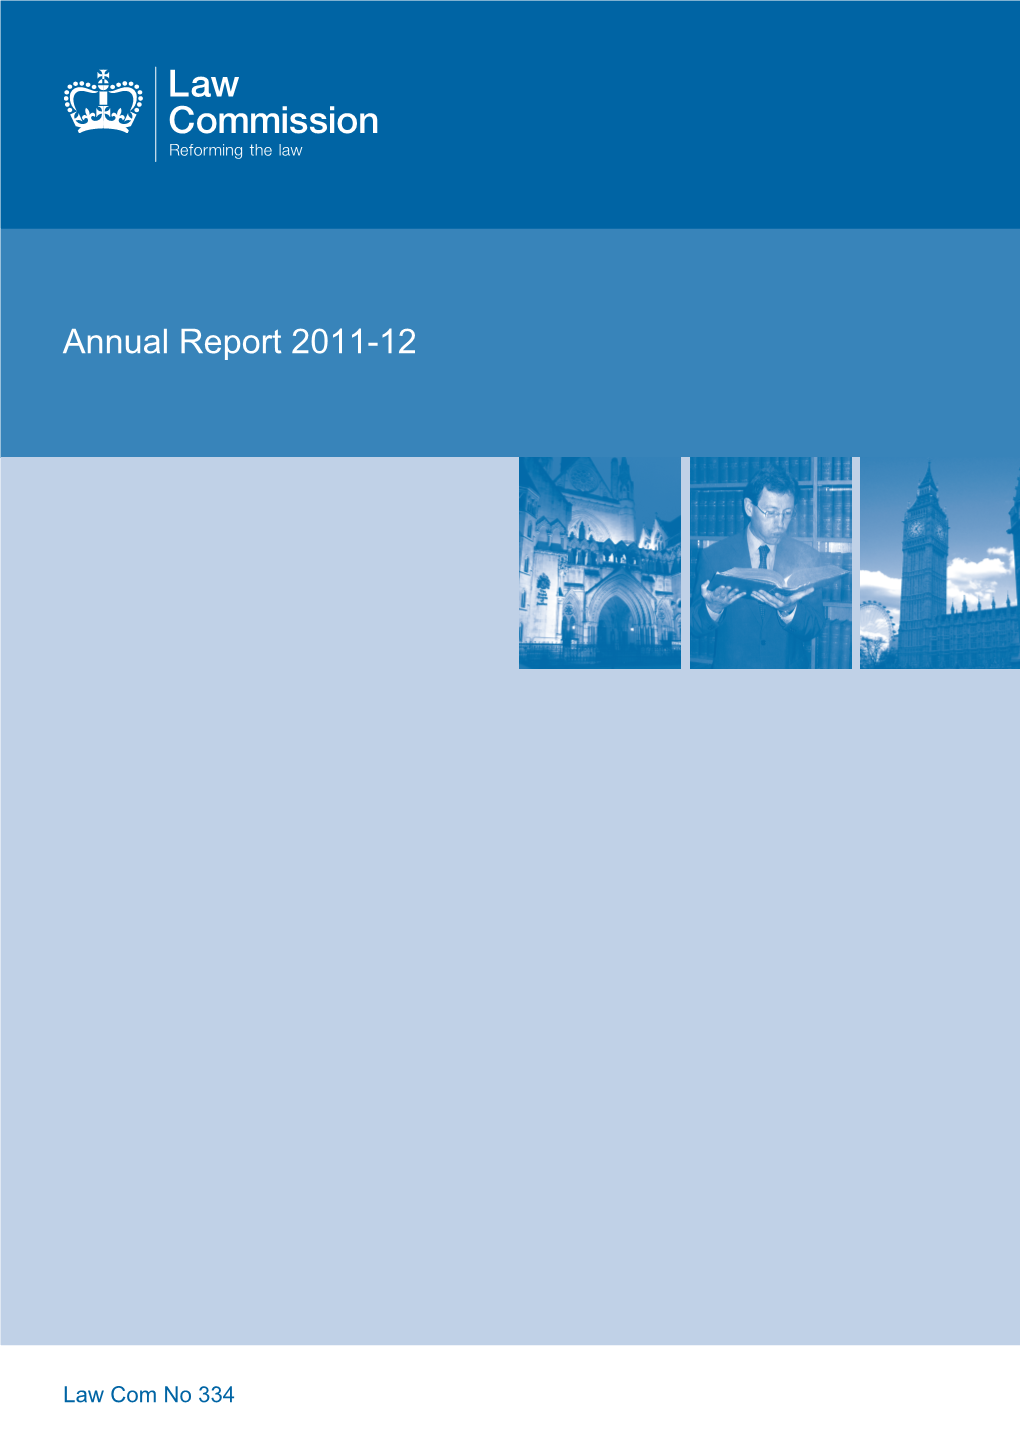 Law Commission Annual Report 2010-11